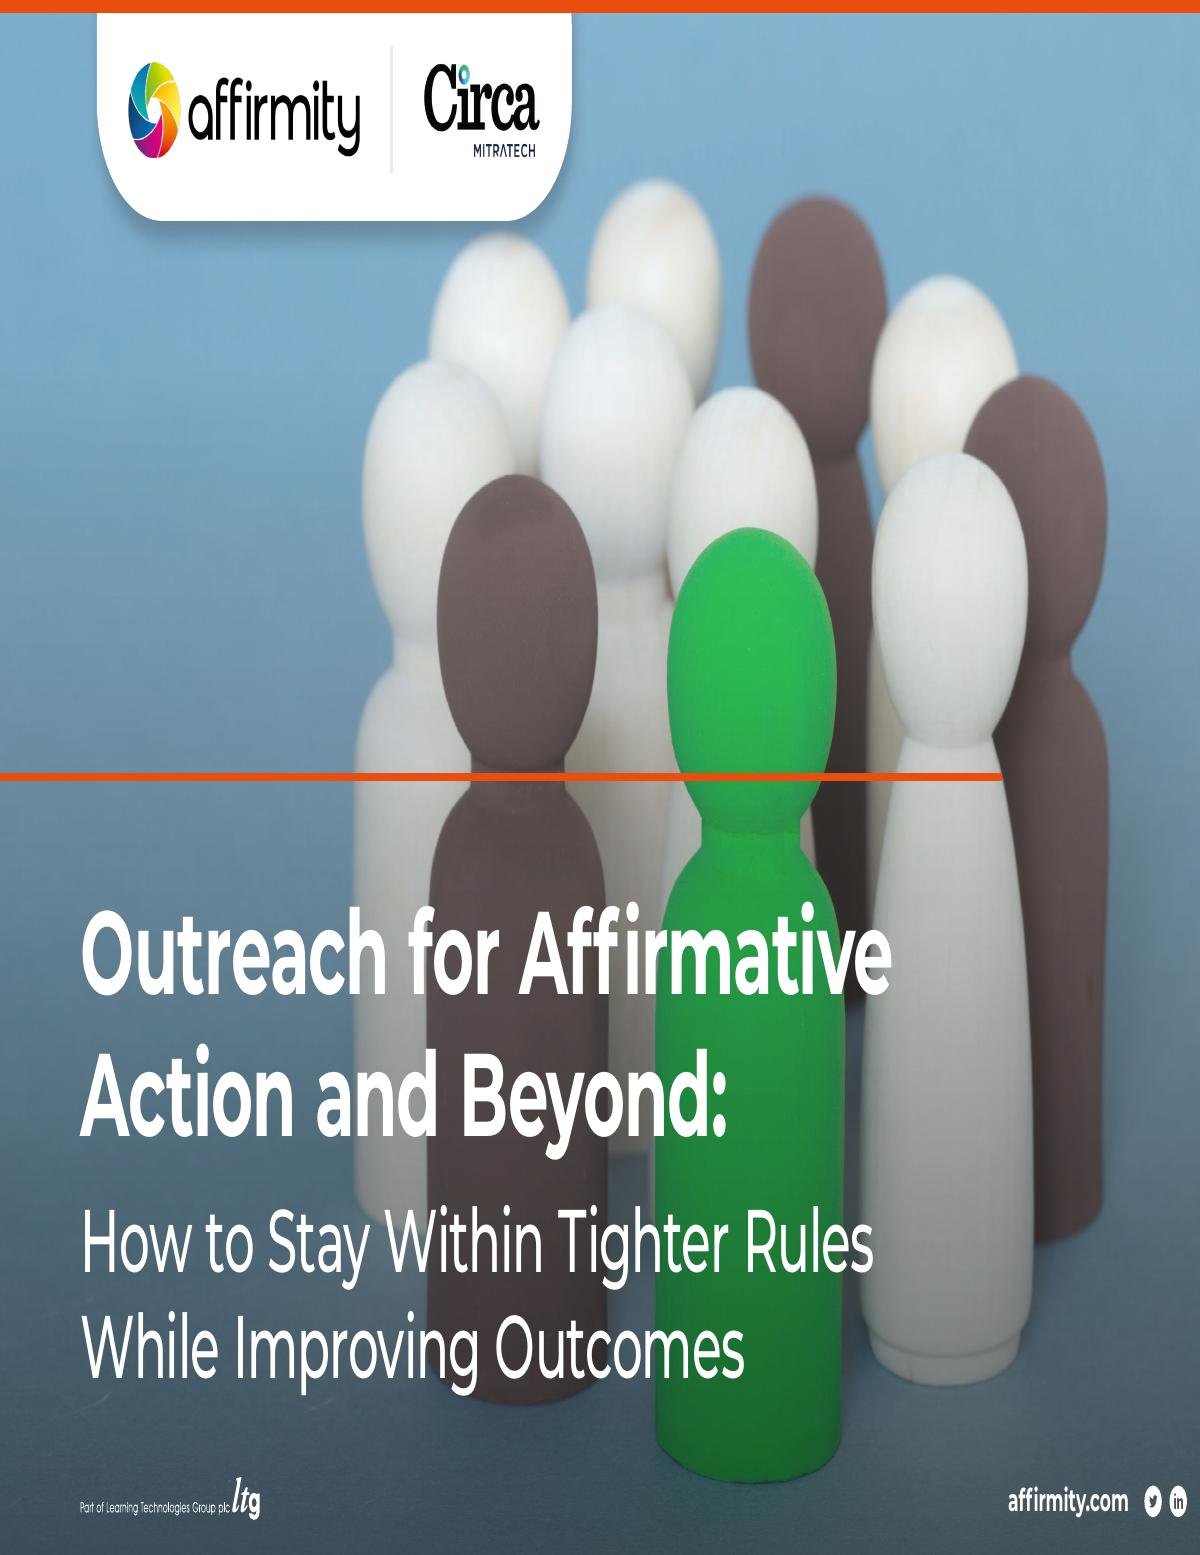 Outreach for Affirmative Action and Beyond: How to Stay Within Tighter Rules While Improving Outcome